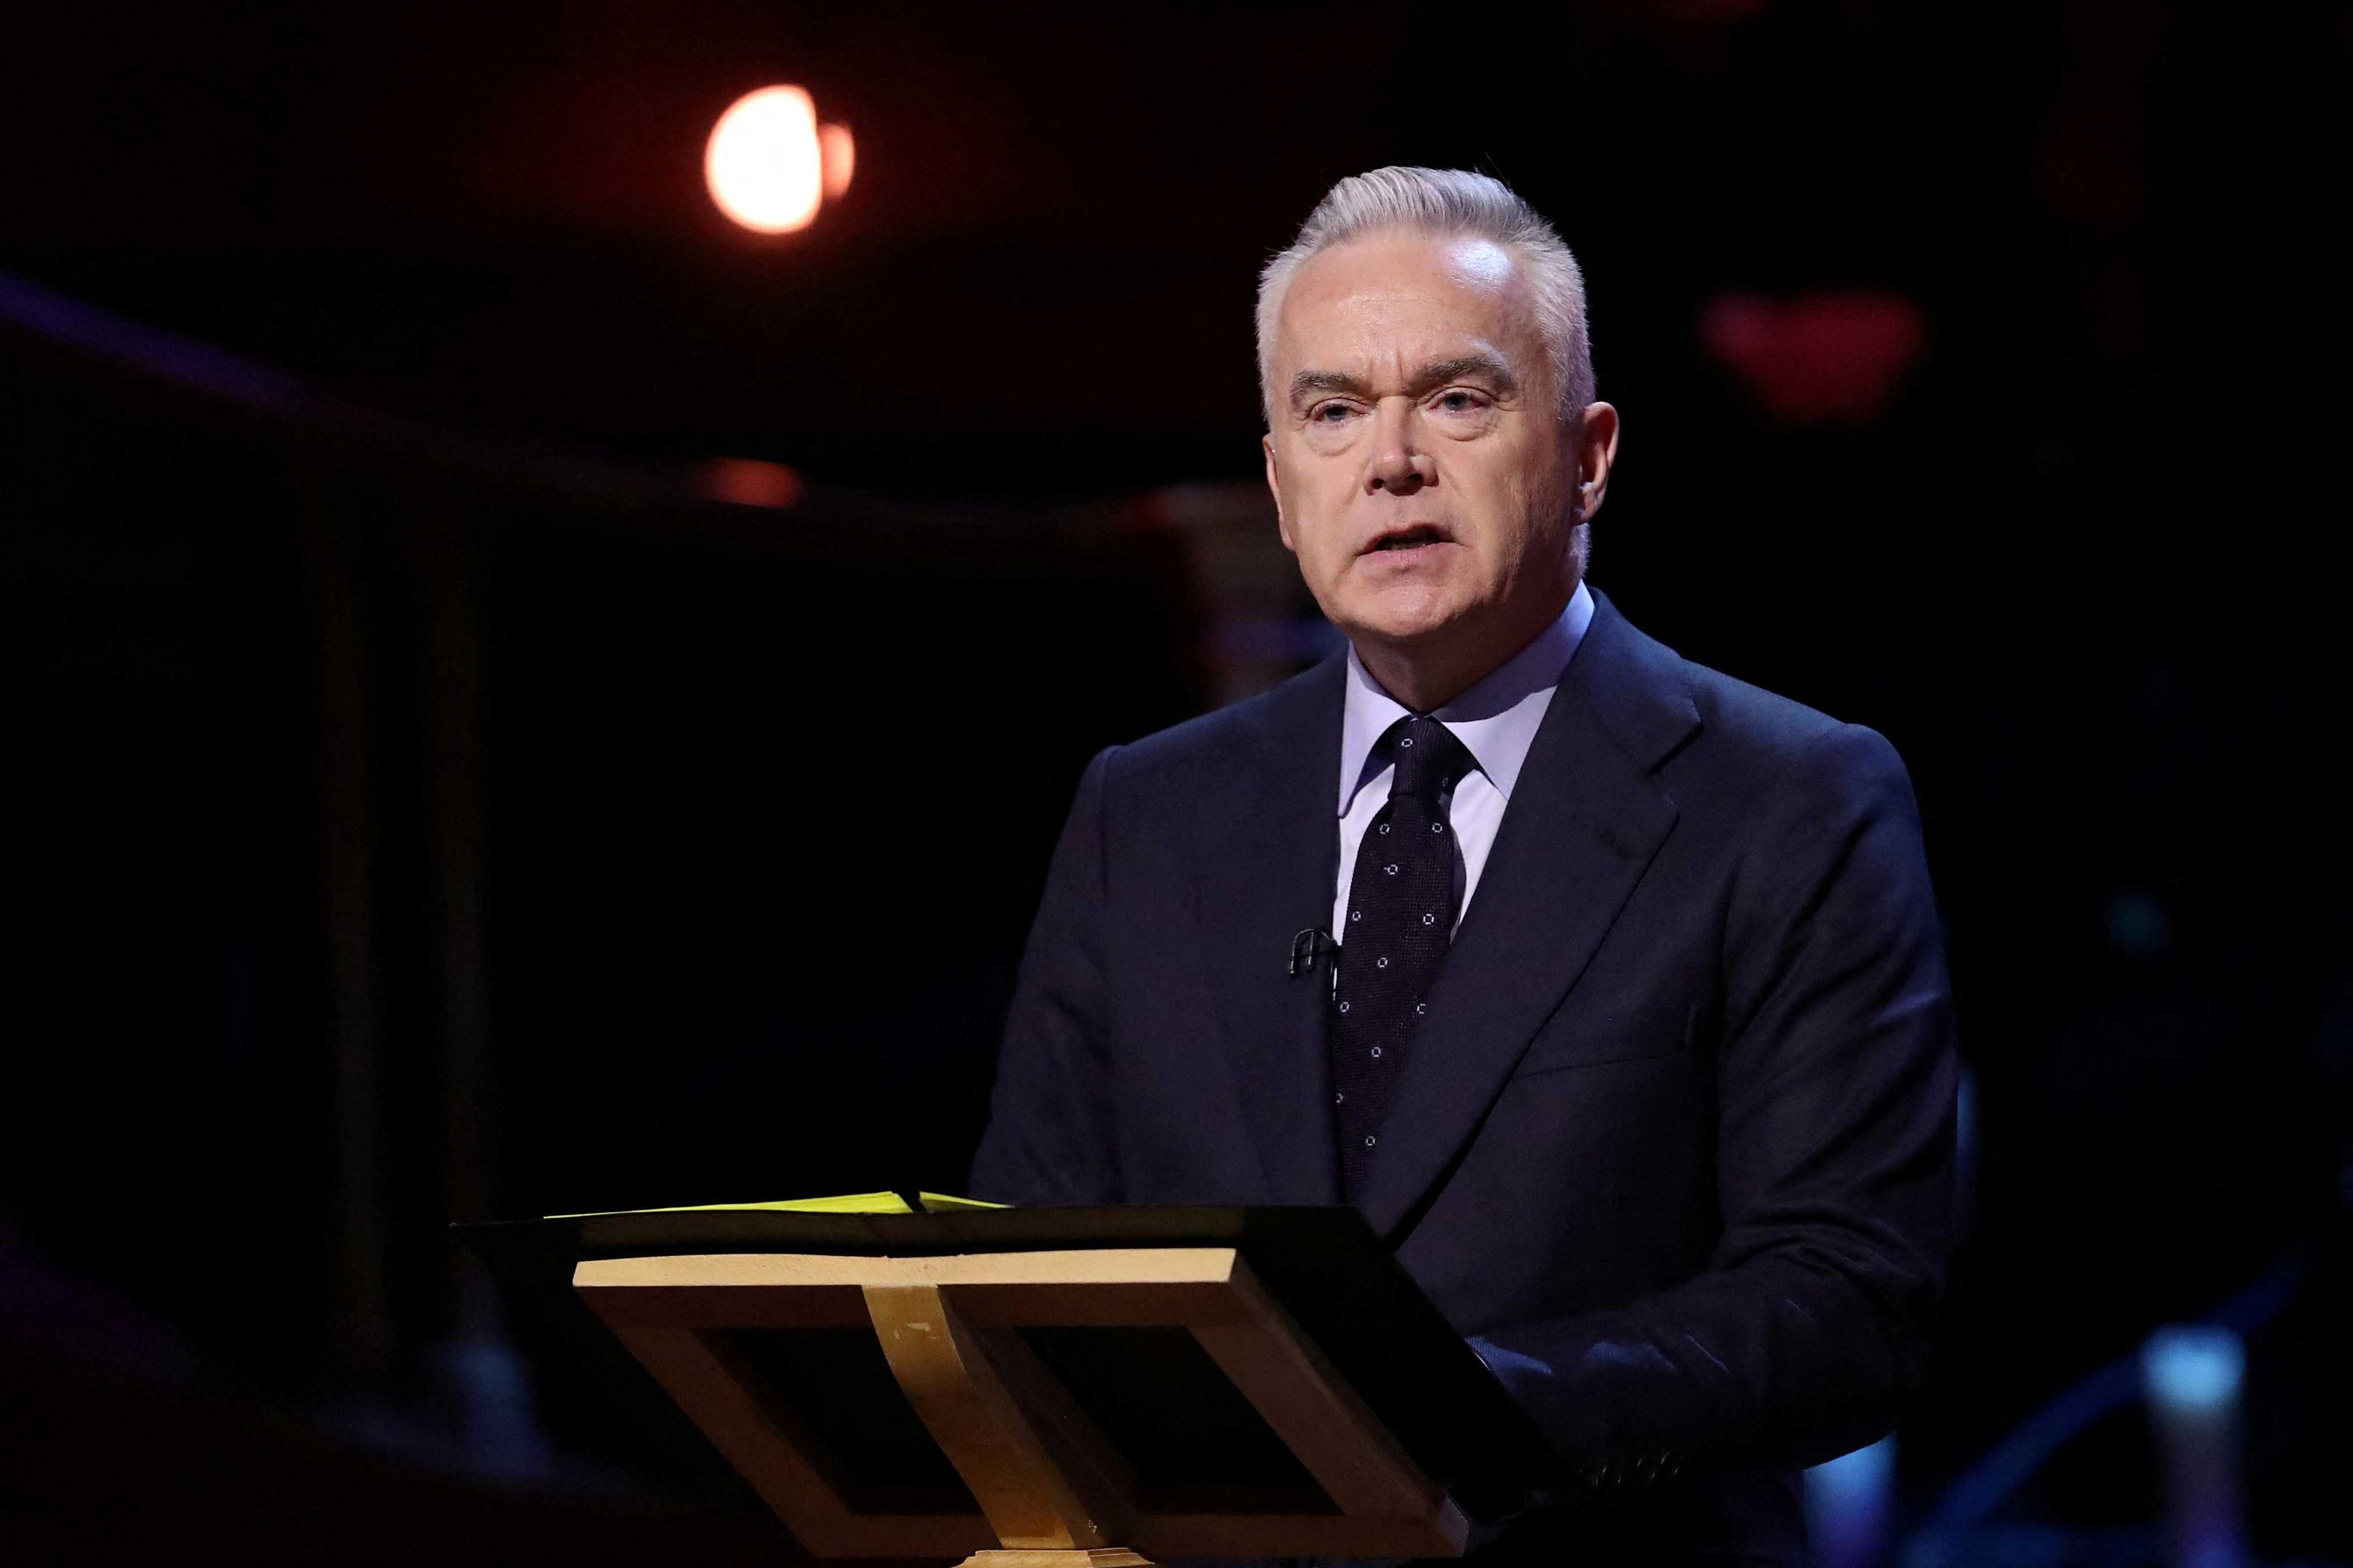 BBC newsreader Huw Edwards speaks at the UK Holocaust Memorial Day Commemorative Ceremony in Westminster in London, Britain Jan 27, 2020. Photo: Reuters